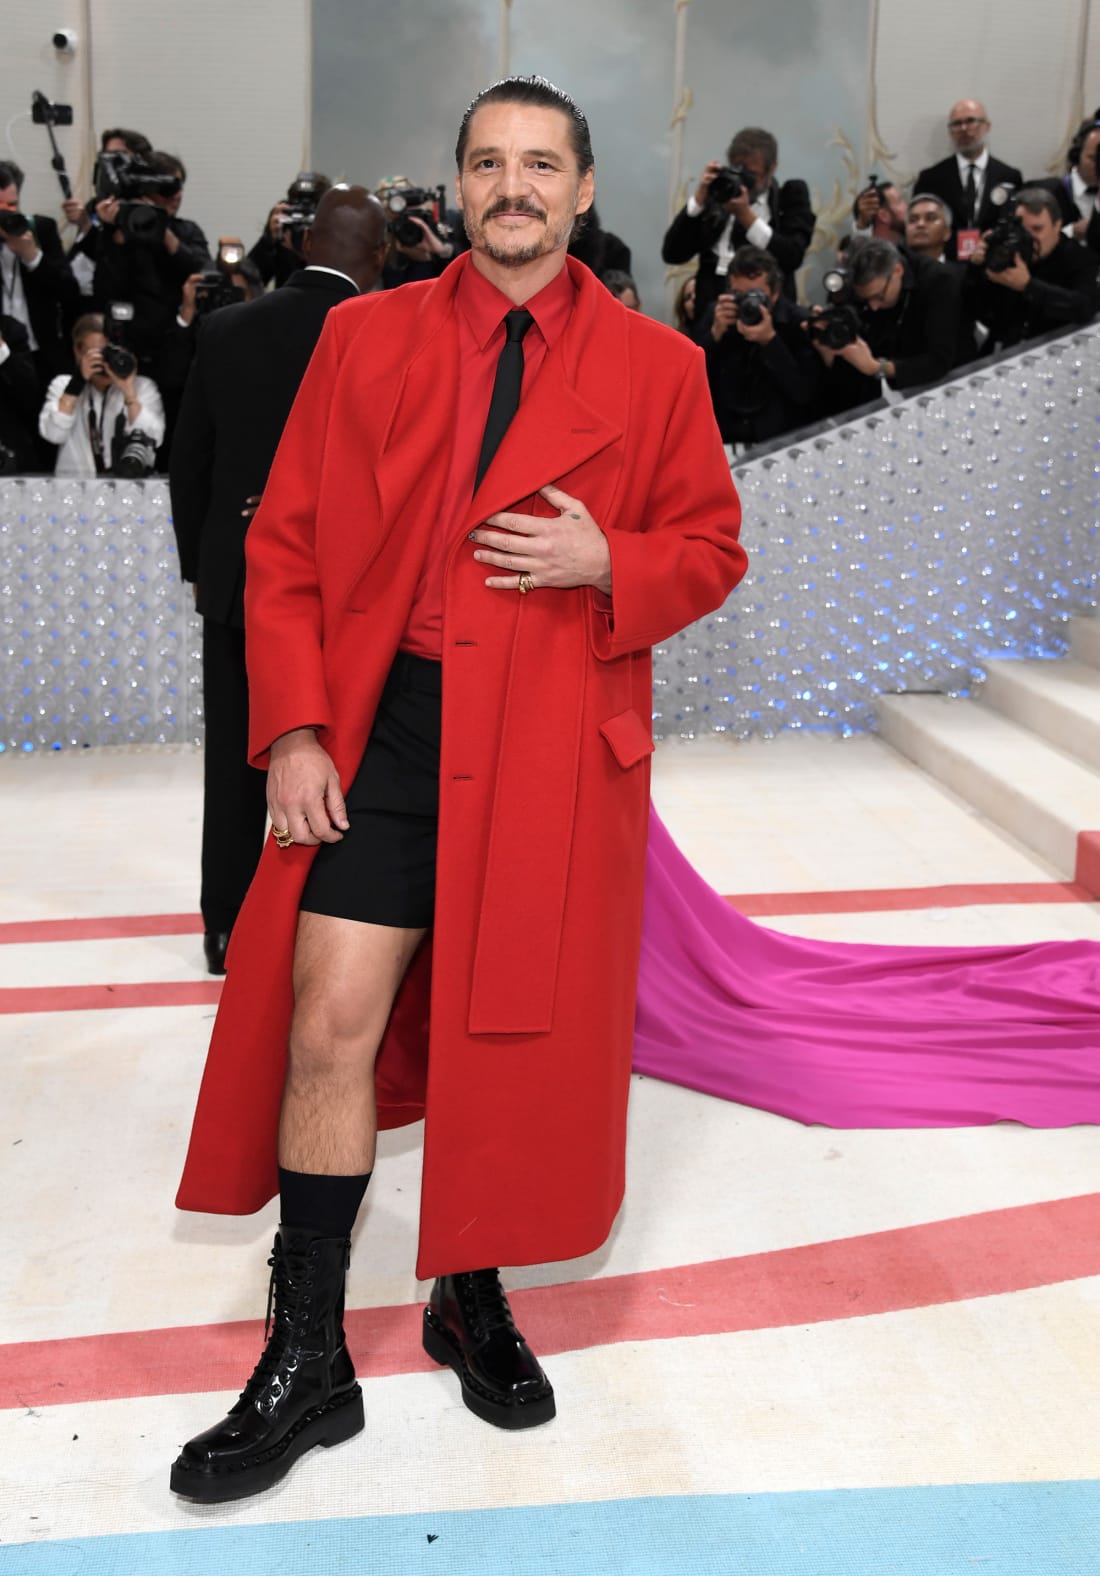 Pedro Pascal — the internet's "daddy" — wore Valentino, pairing black shorts with a long red coat.